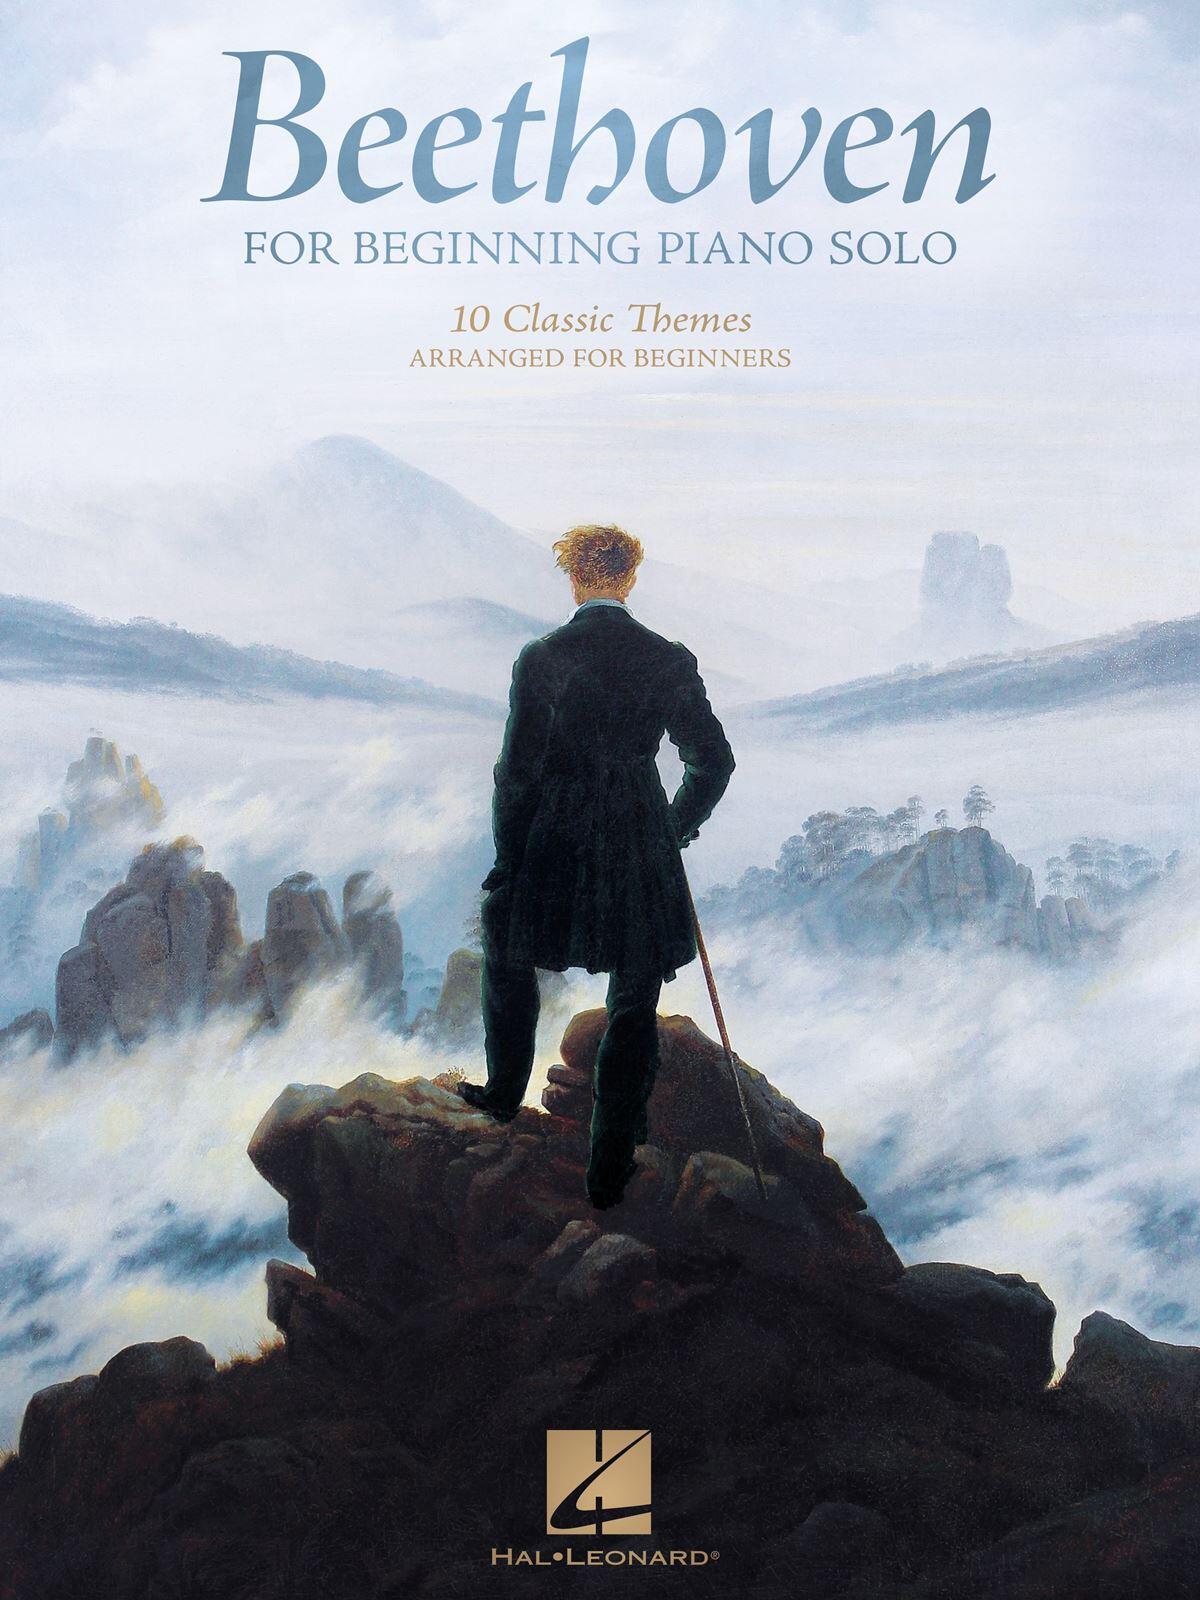 Hal Leonard Beethoven for Beginning Piano Solo 10 Classic Themes Arranged for Beginners : photo 1